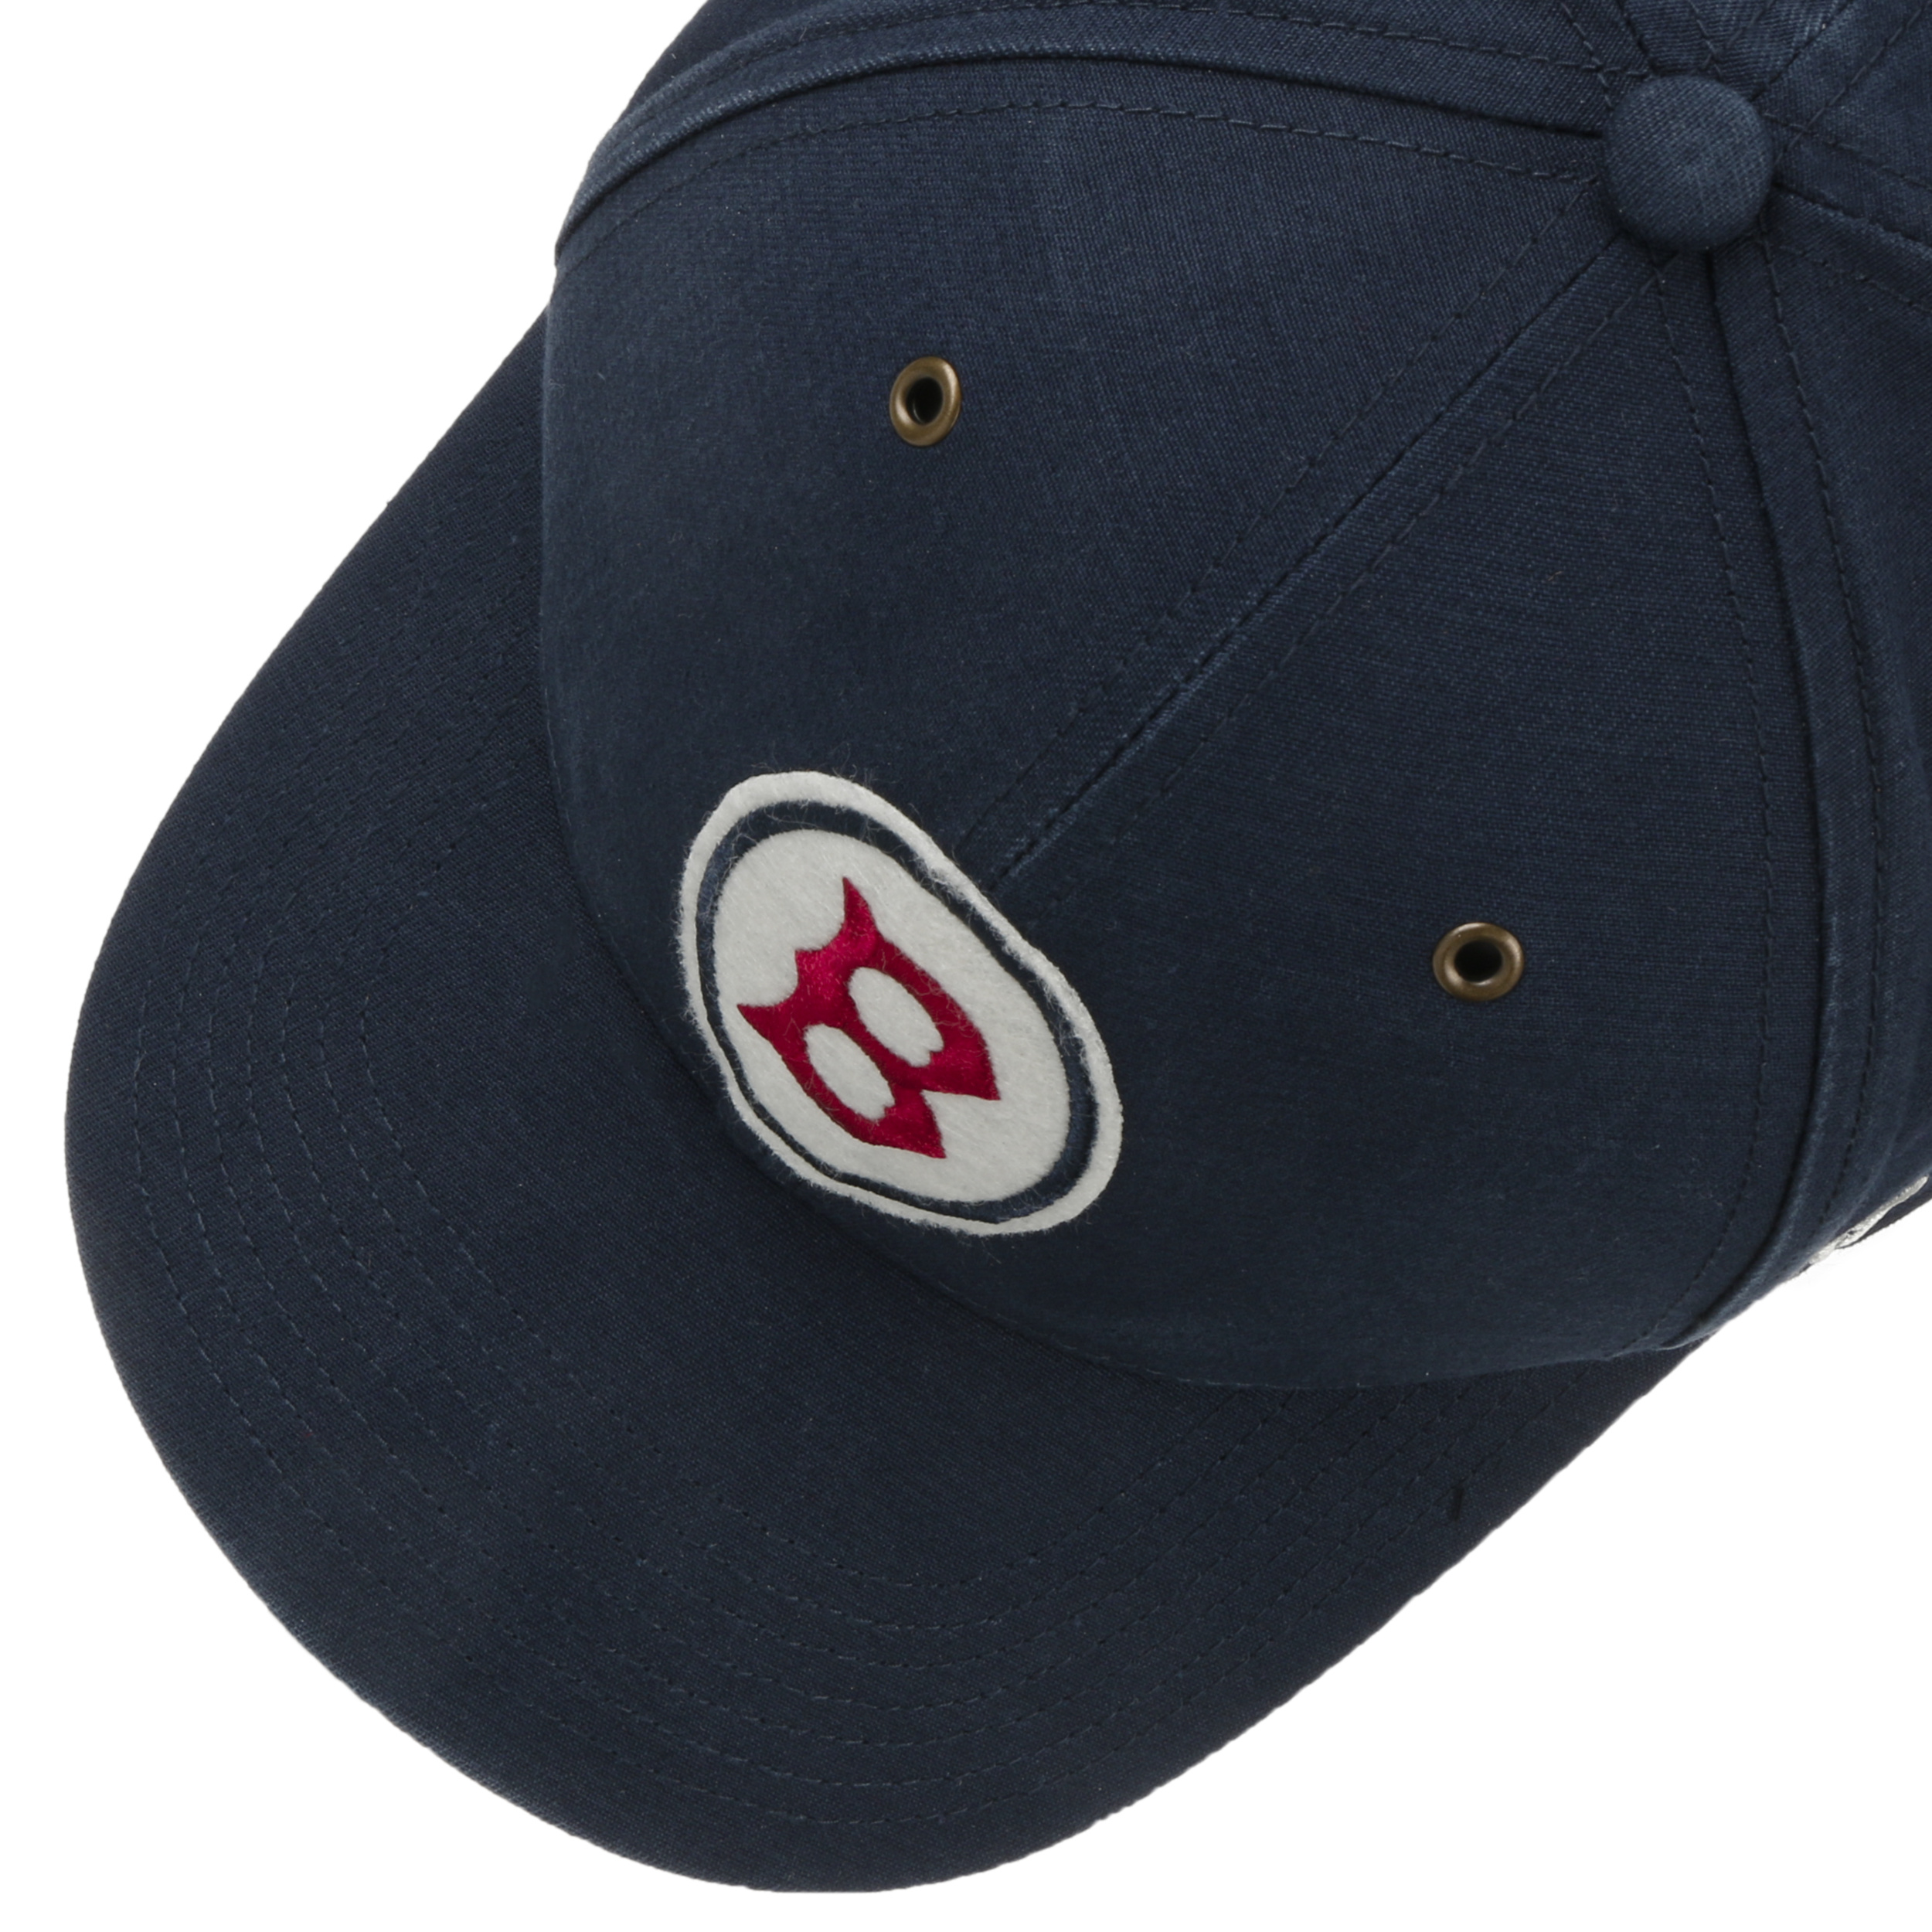 MLB Vintage Red Sox Back Midfield Cap by 47 Brand